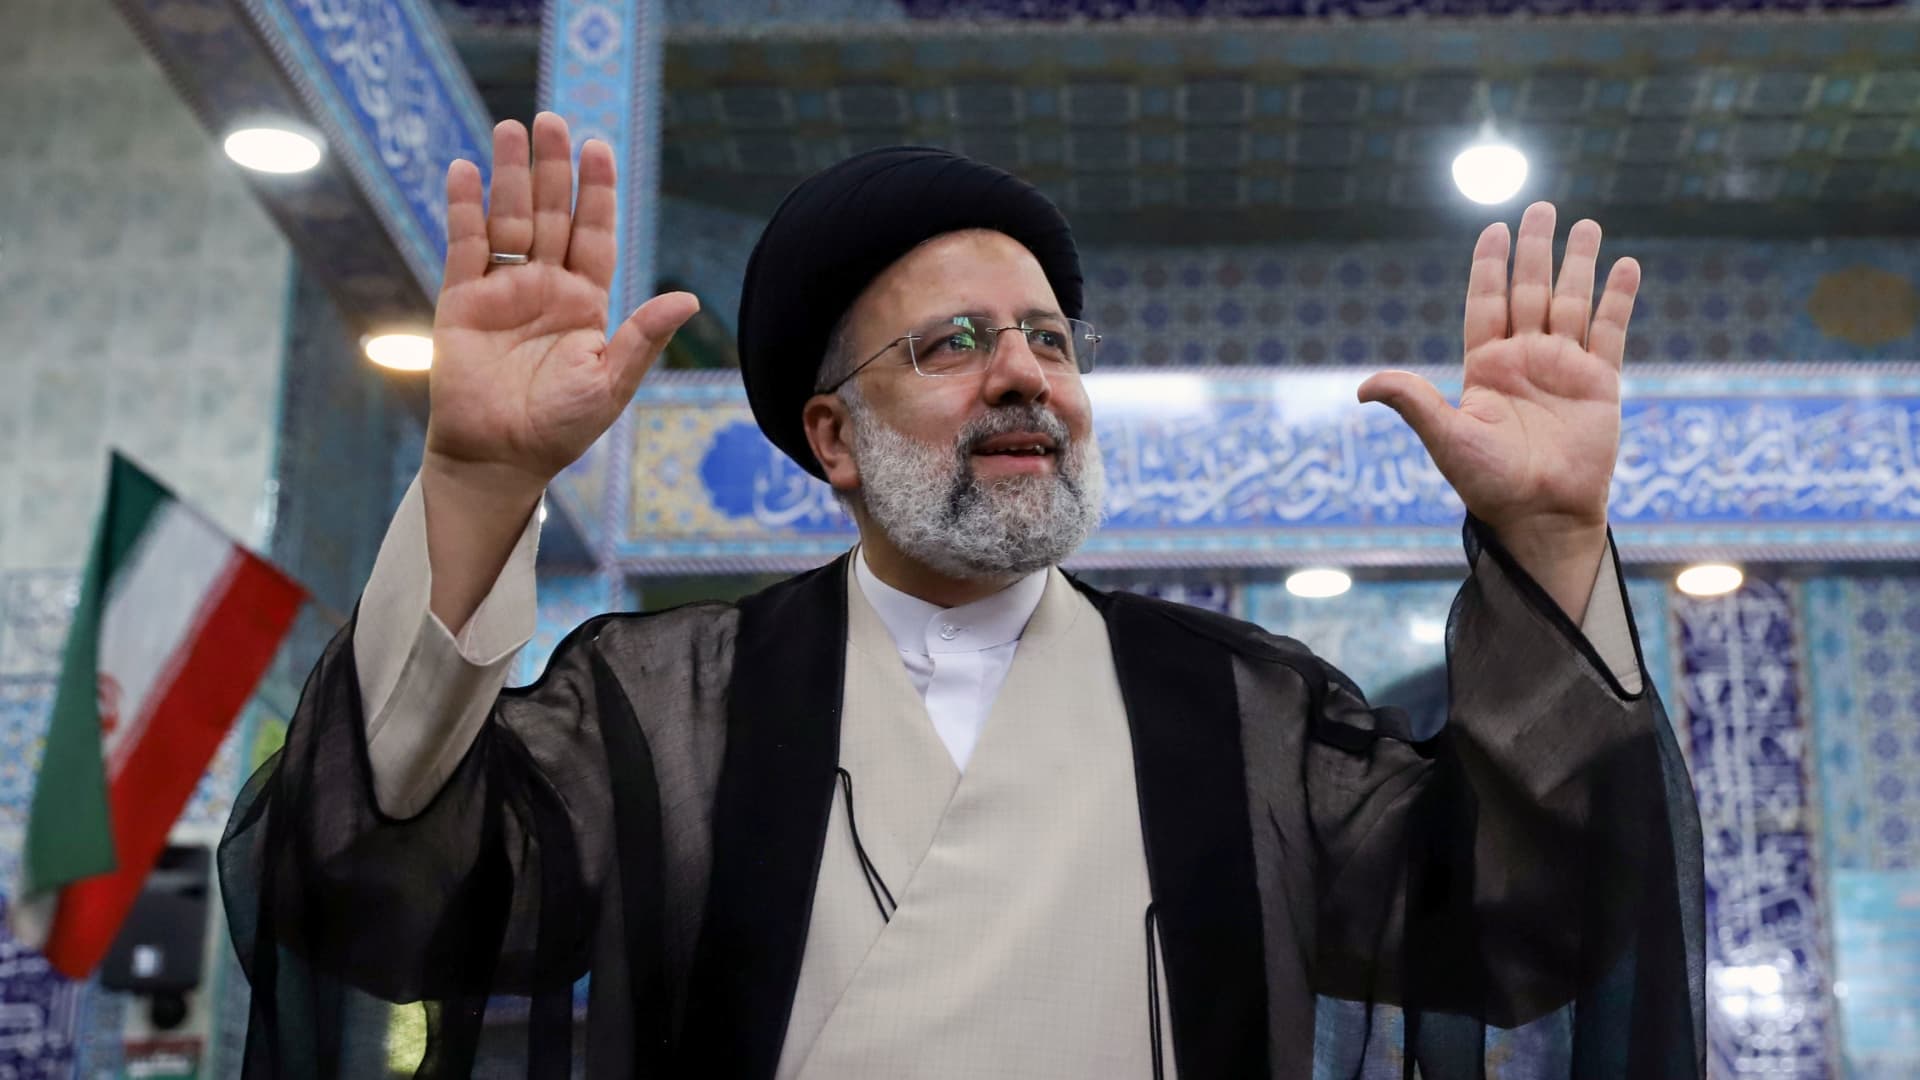 Presidential candidate Ebrahim Raisi gestures after casting his vote during presidential elections at a polling station in Tehran, Iran June 18, 2021.